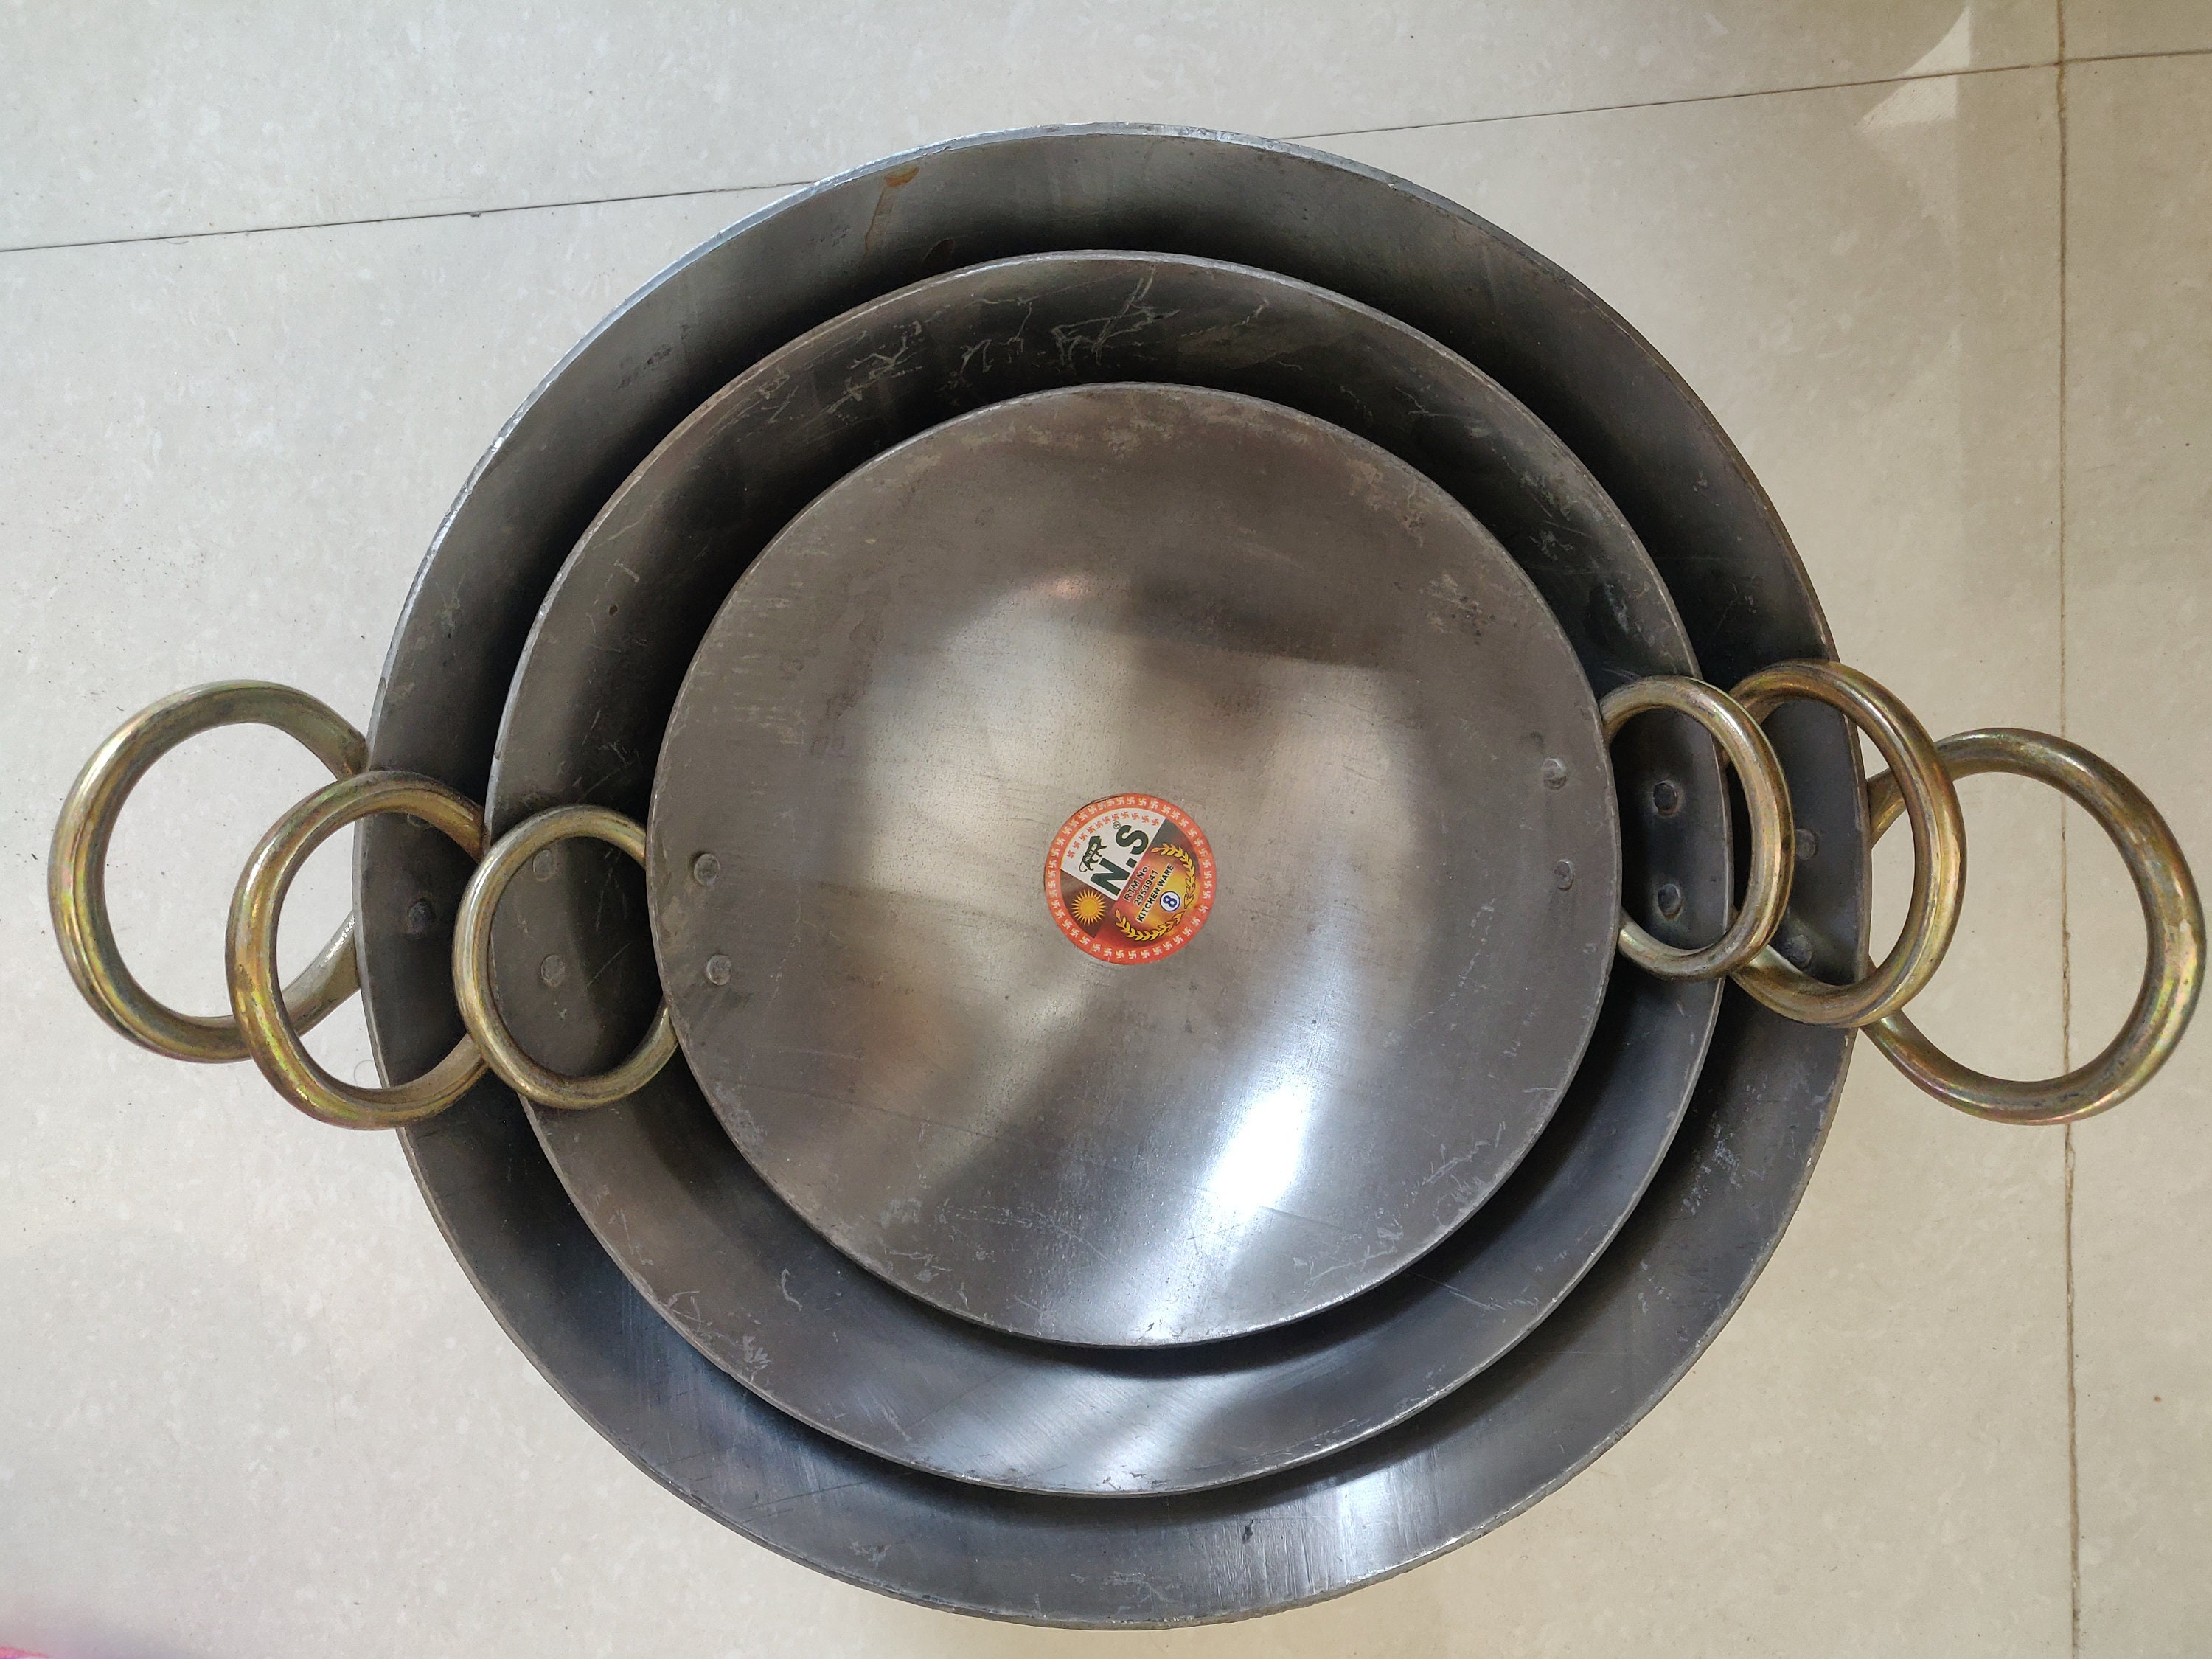 Traditional Indian Iron Kadai Wok - 18 Inches, Riveted/Welded Handles